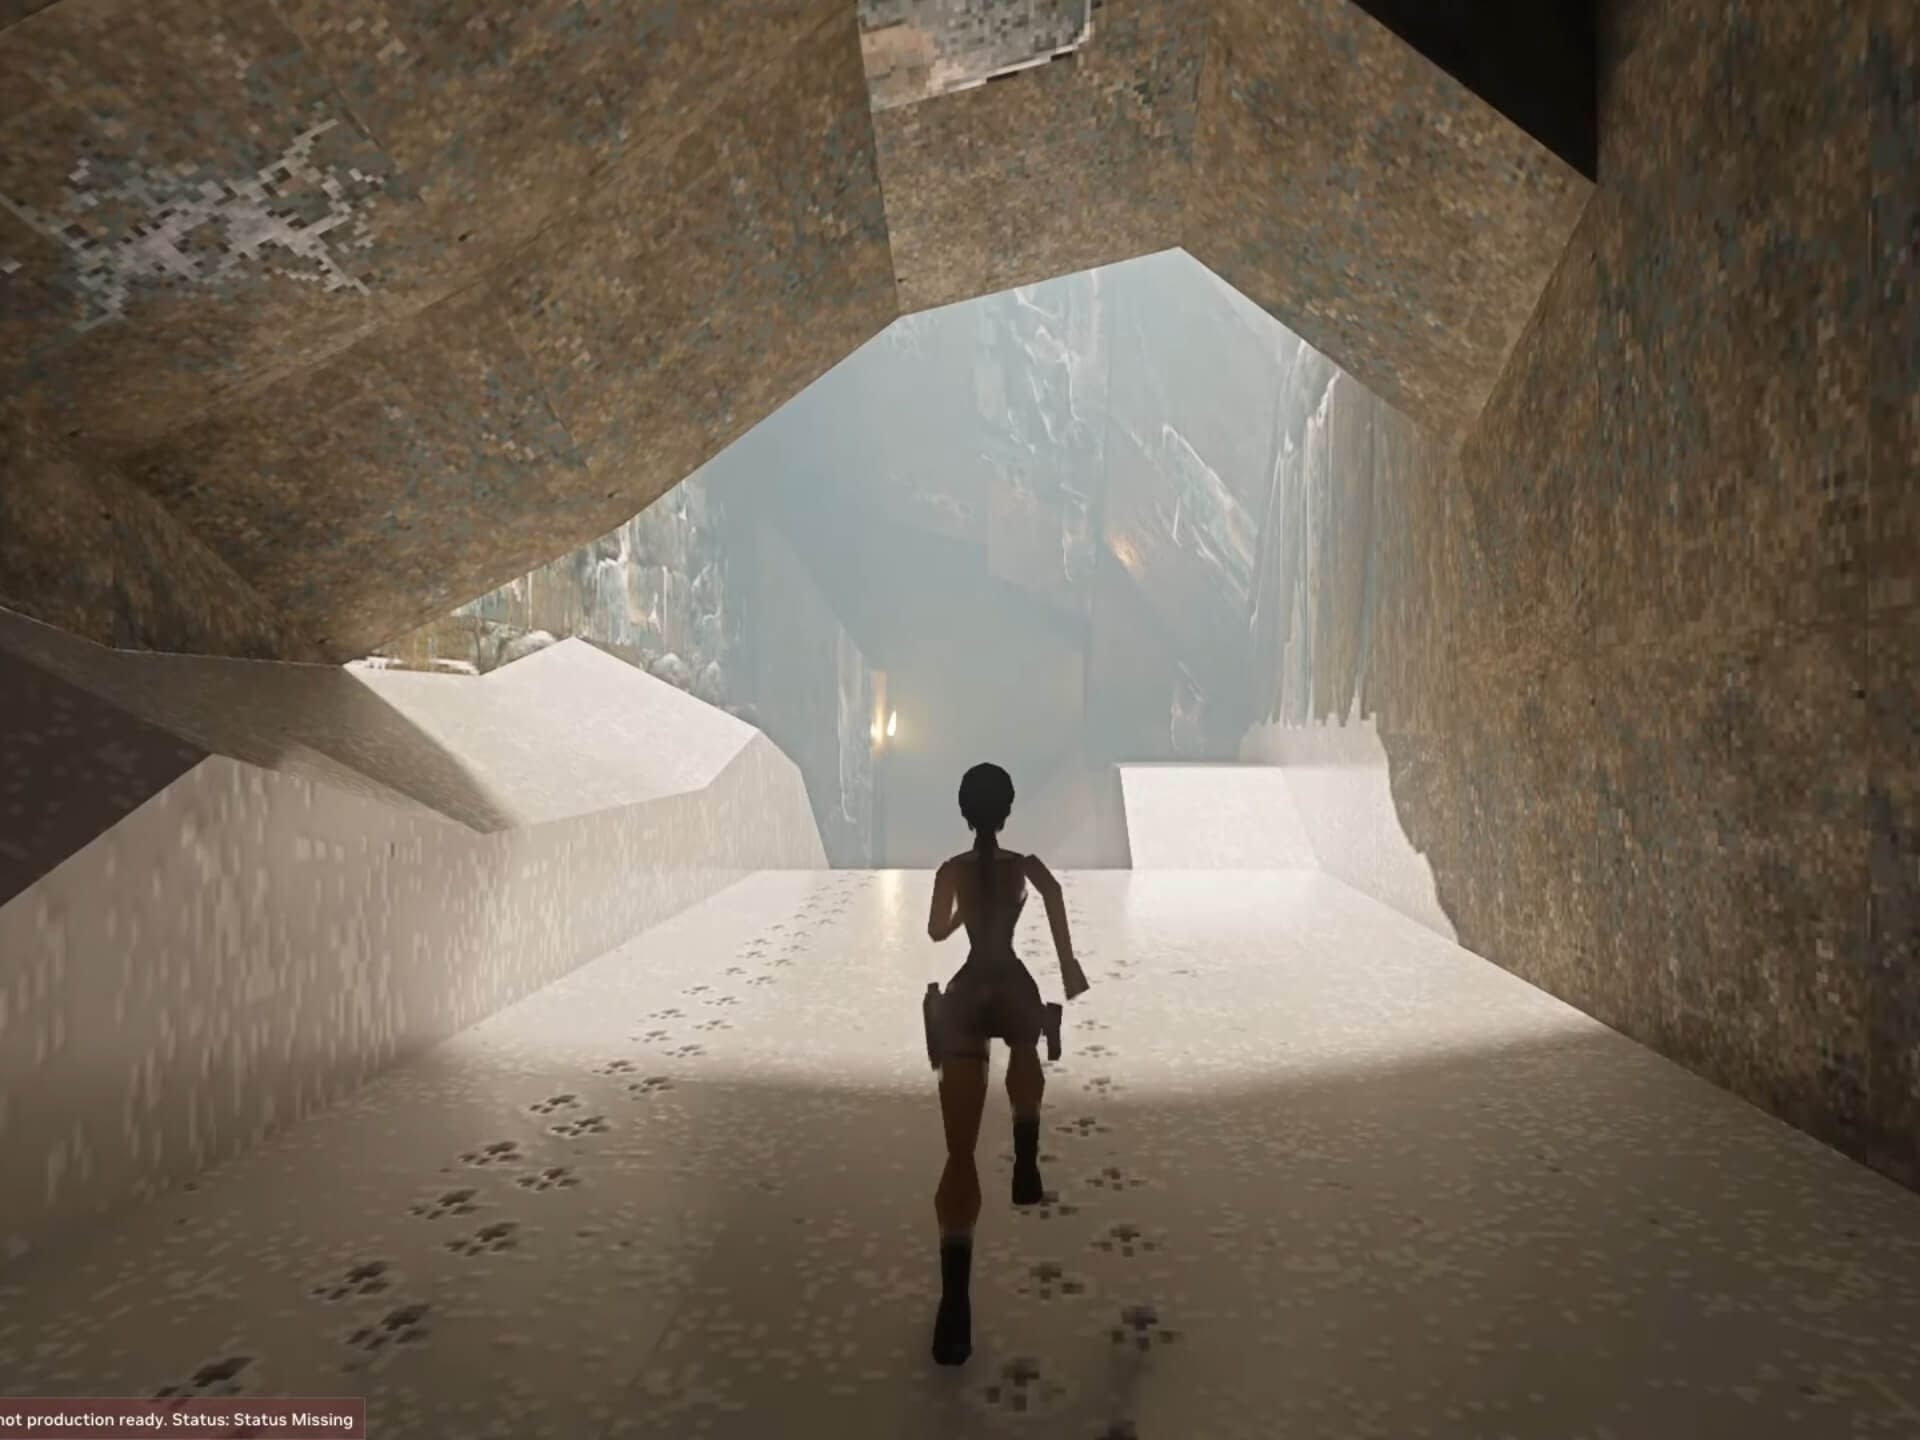 Original Tomb Raider was renewed with RTX Remix Mode: Here’s Images